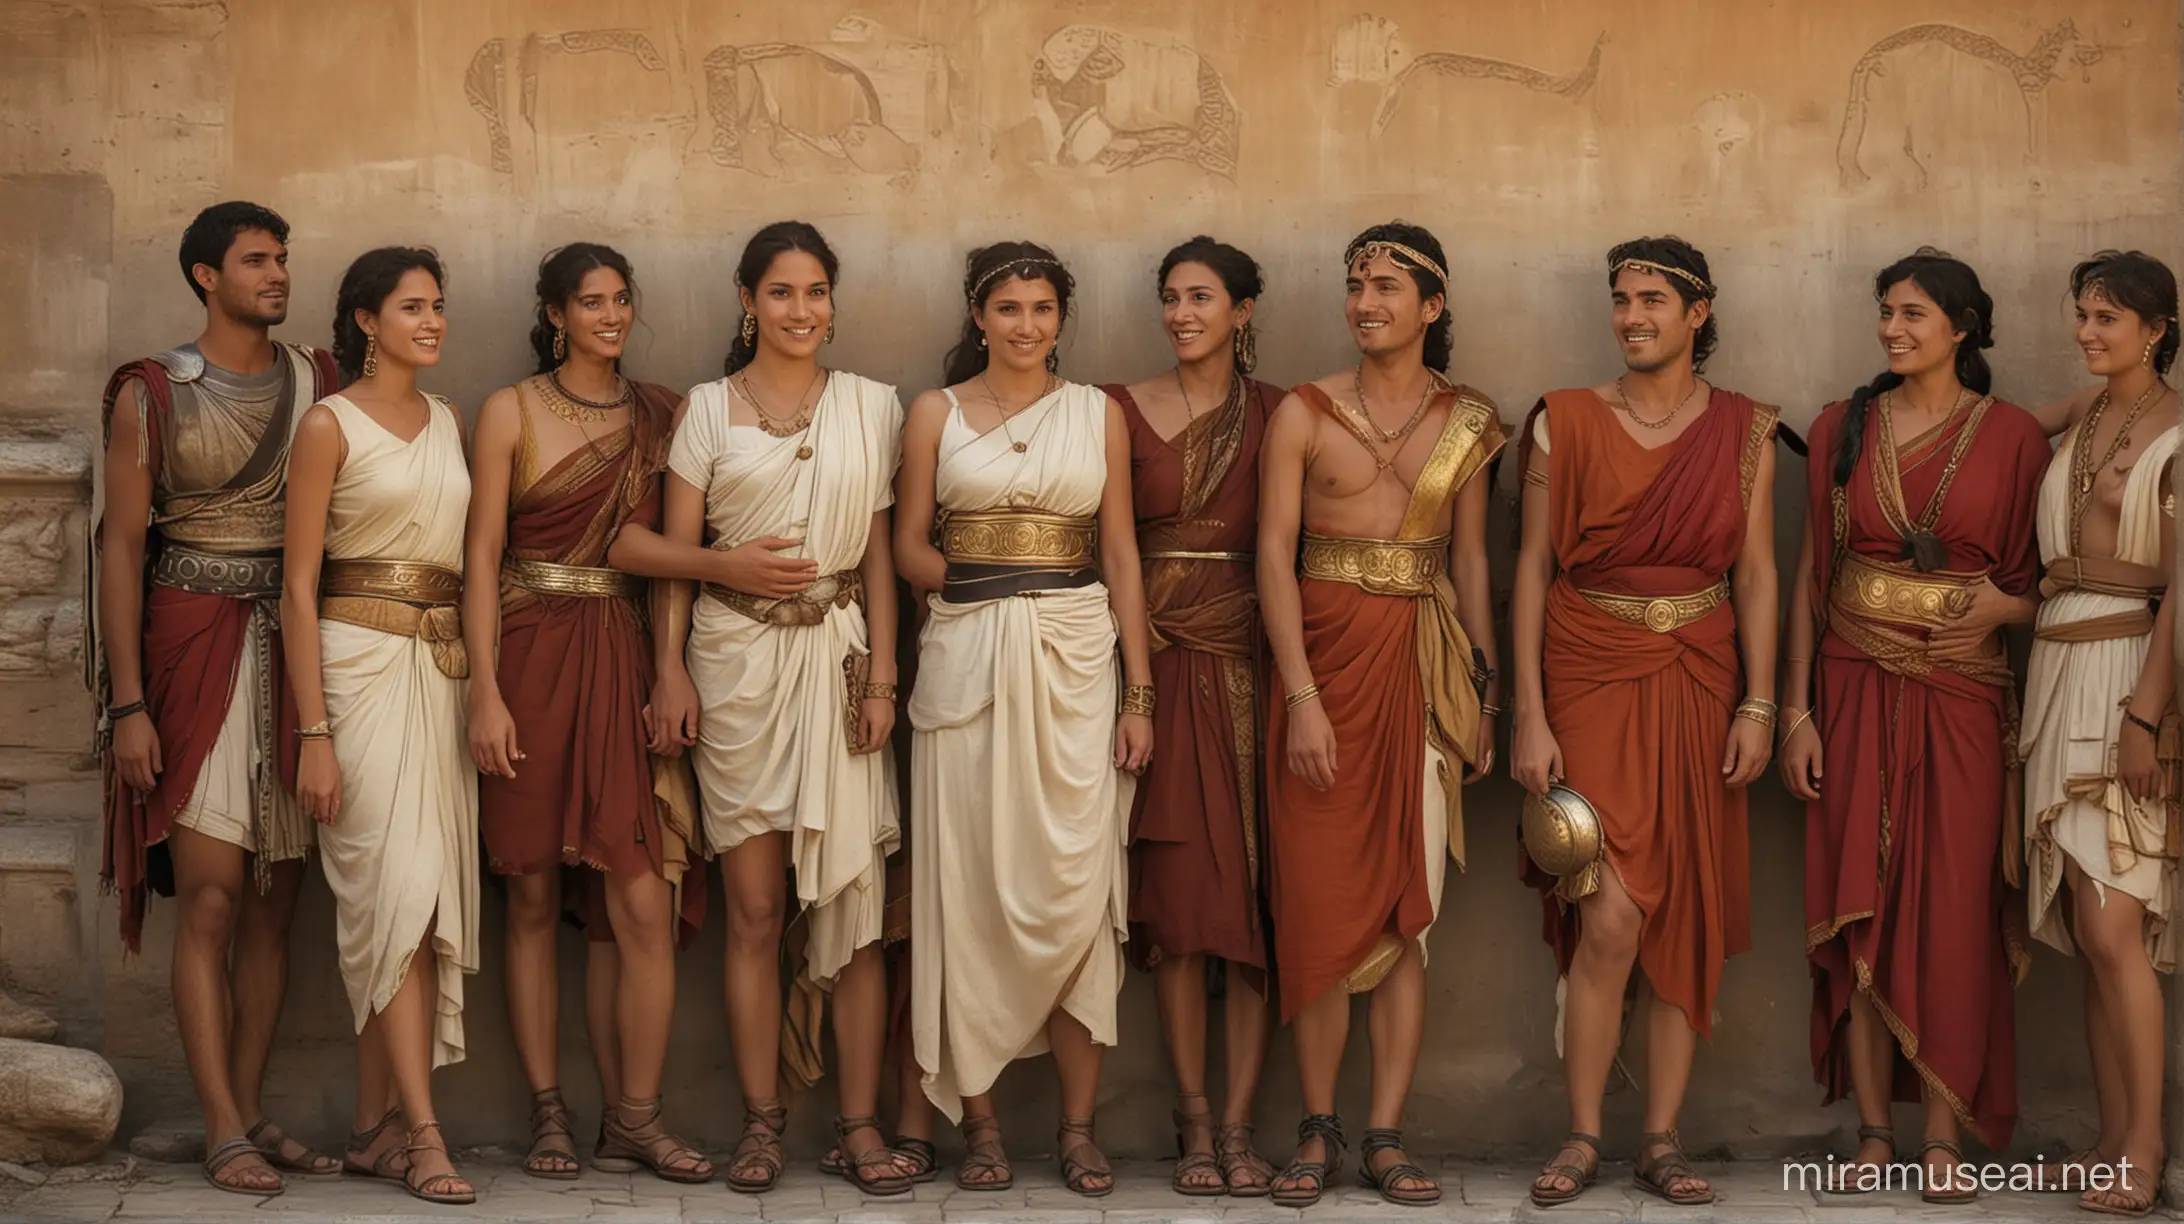 People of different cultures, ethnicities, living together in Ancient Rome